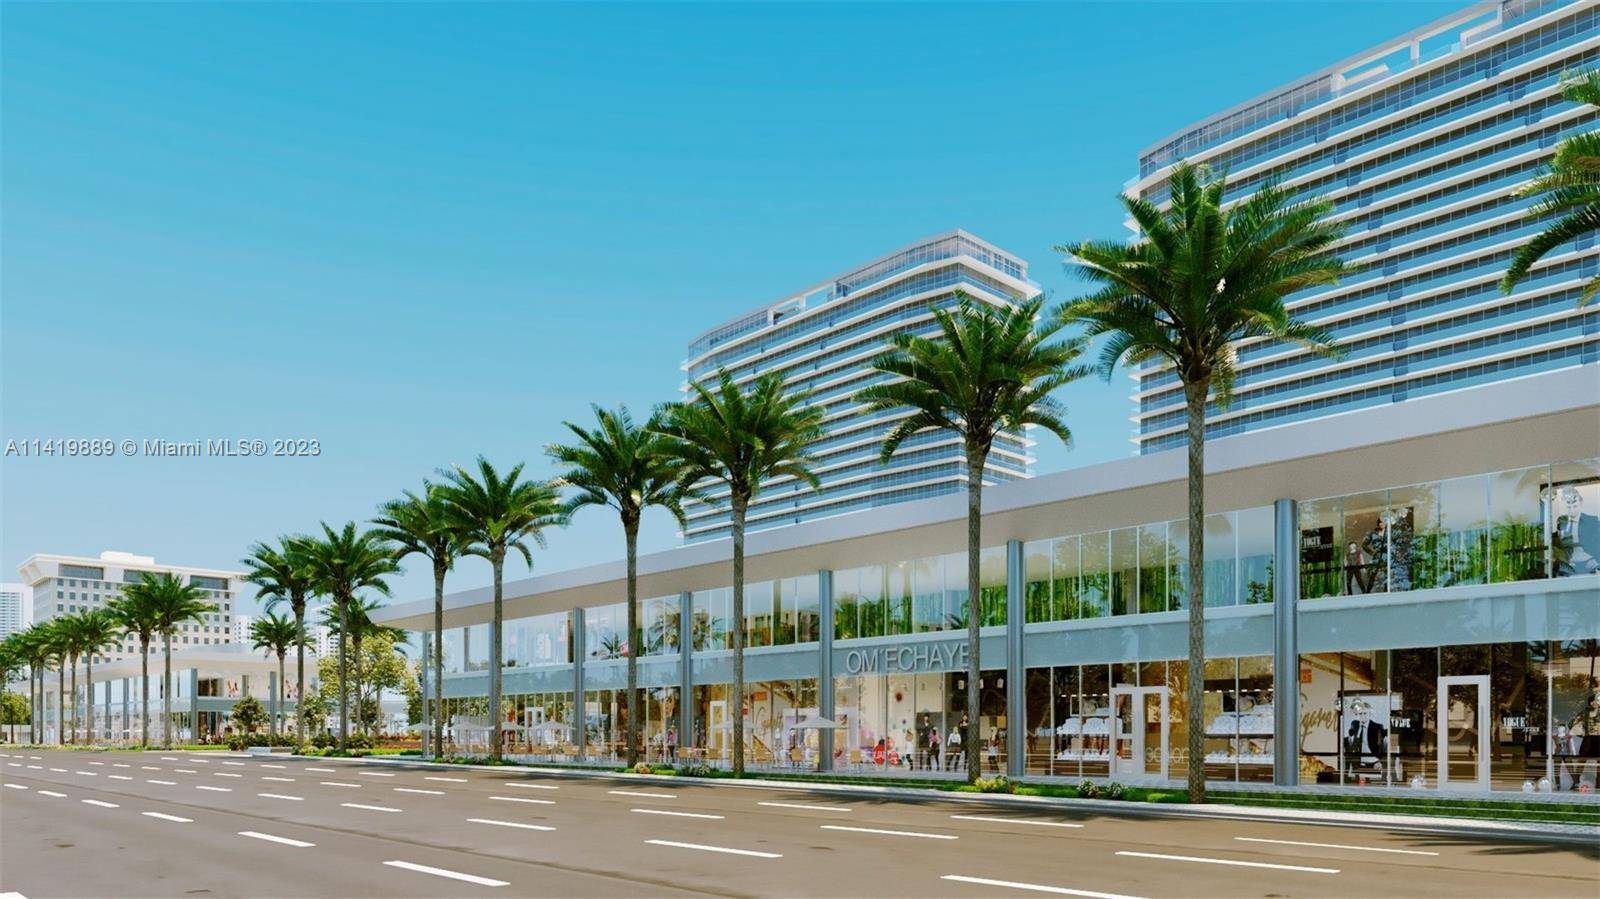 FOR SALE AVAILABLE NOW INCREDIBLE OPPORTUNITY TO BUY THE BRAND NEW COMMERCIAL SPACE, BUILD YOUR DREAM OFFICE, SHOP, RESTAURANT AT THE CITY'S ARTHERY HALLANDALE BEACH BLVD.